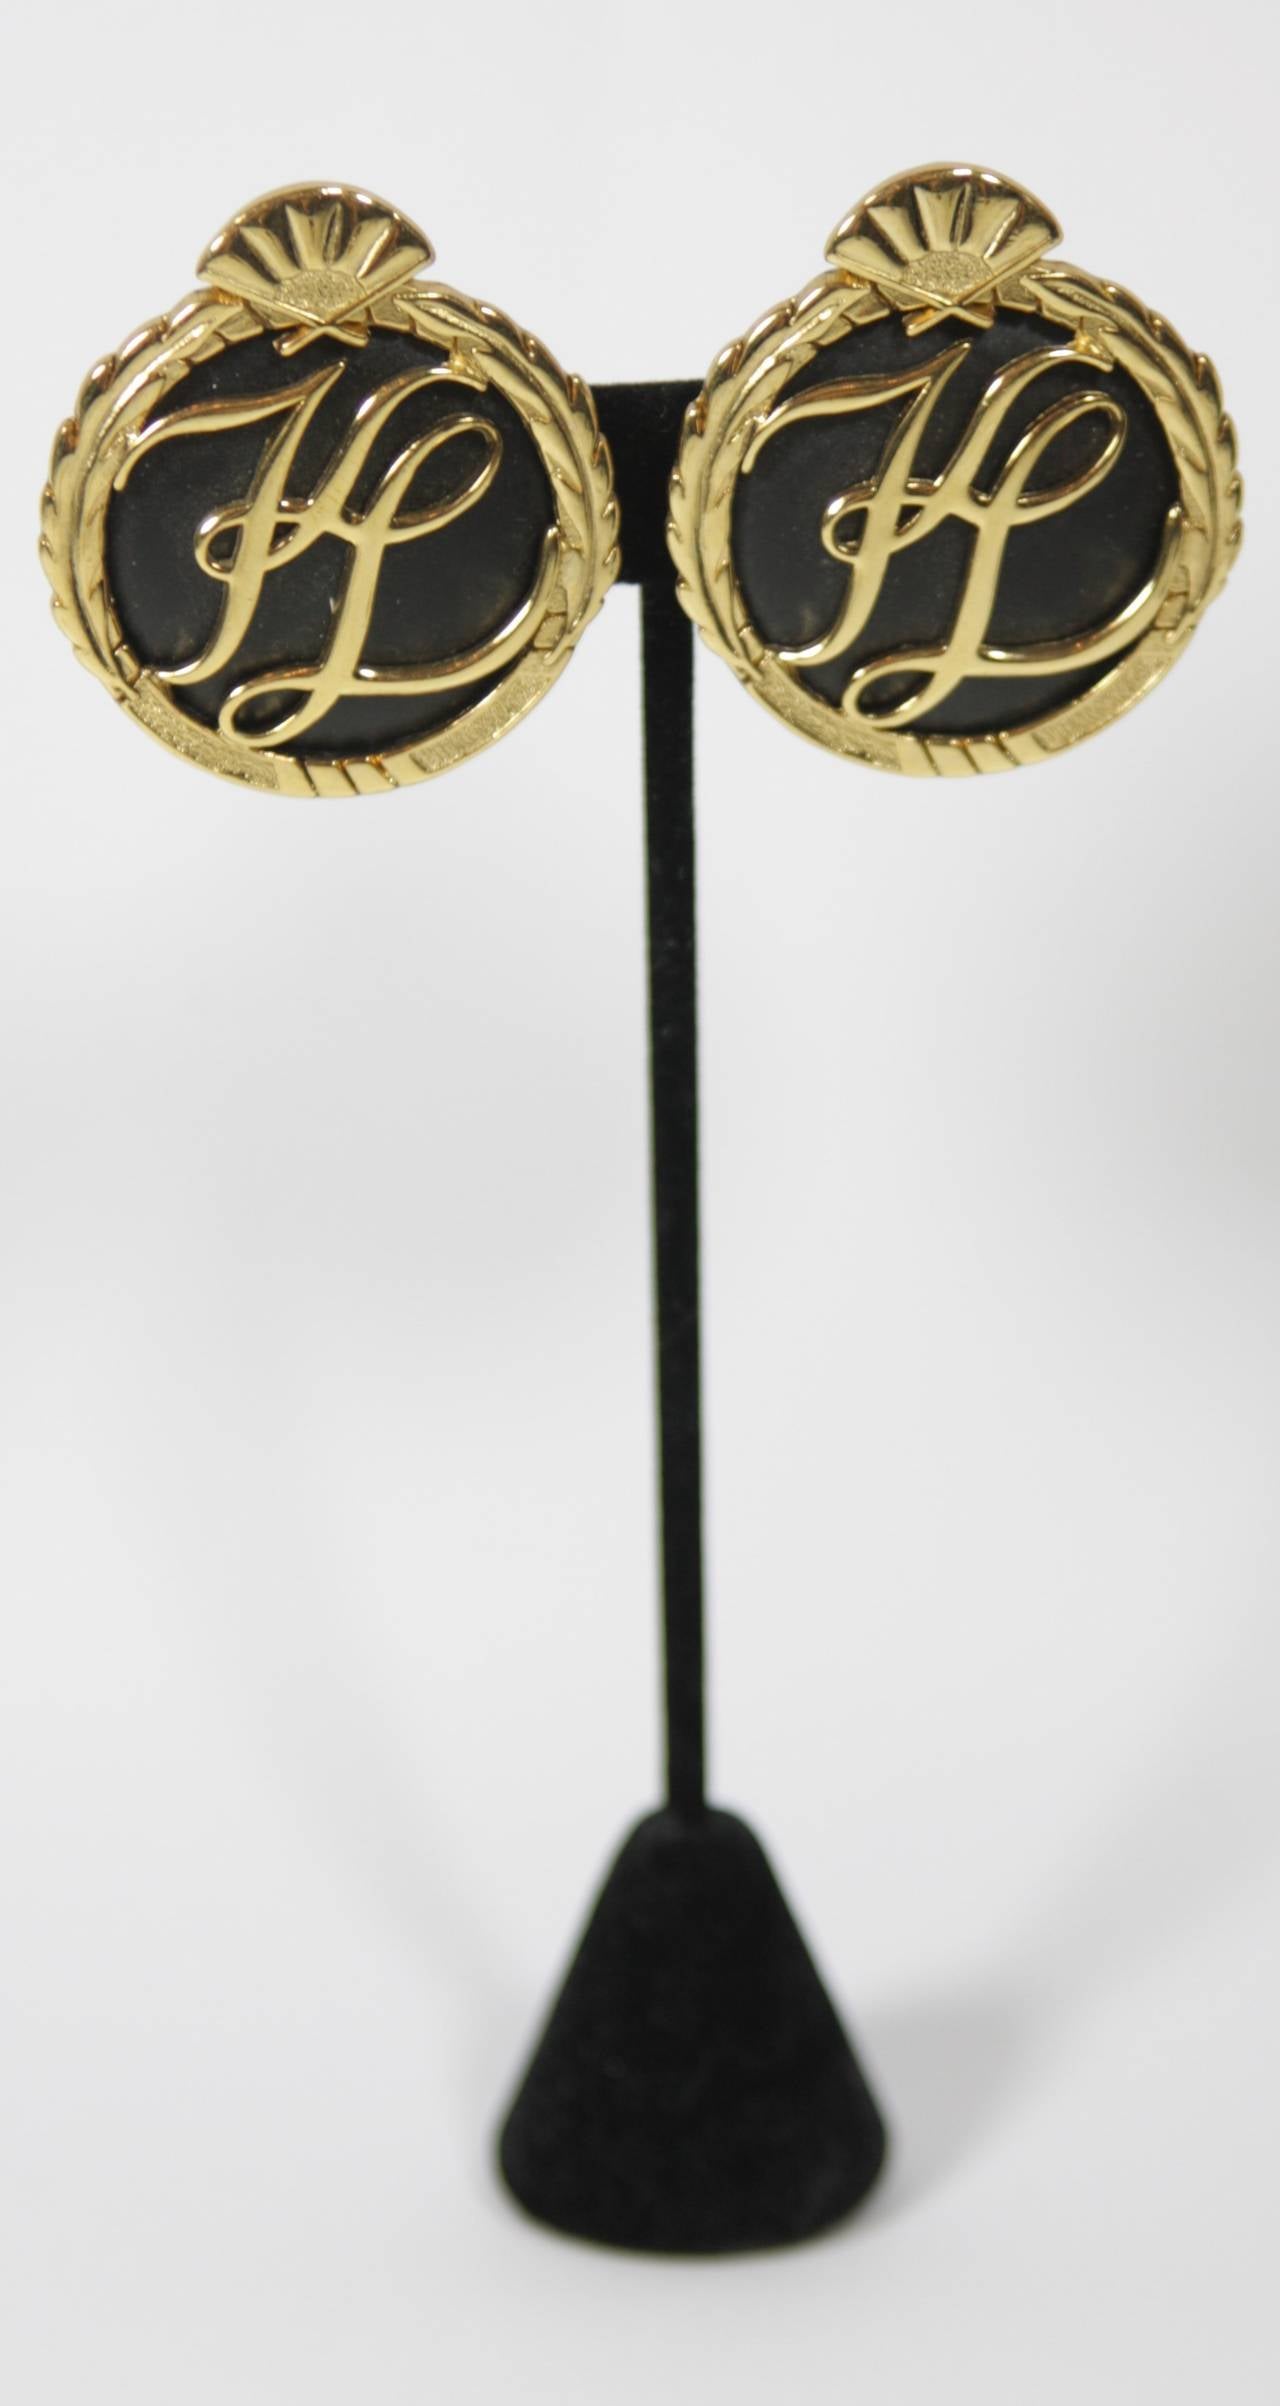 These Karl Lagerfeld earrings are composed of a black and gold tone material. Features the Karl Lagerfeld 